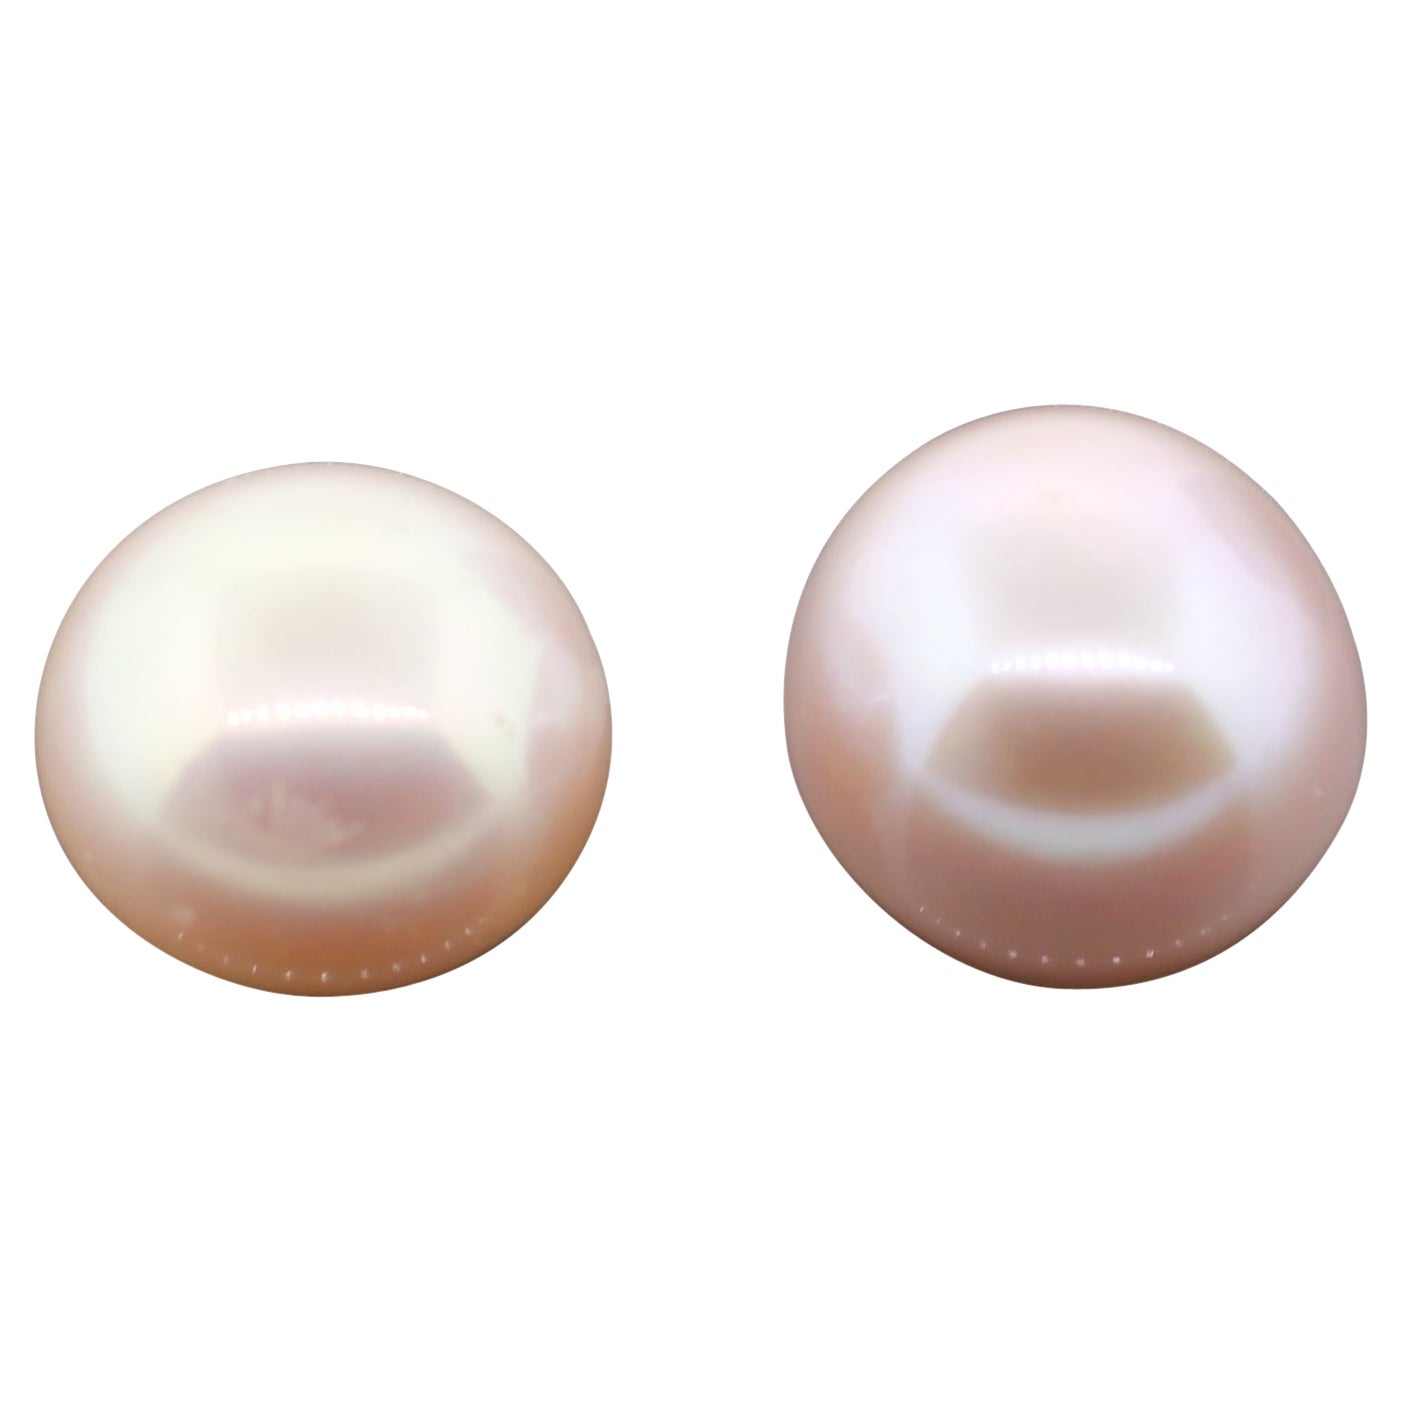 Hakimoto Pair of 14 mm Pink Botton Shape Cultured Pearls